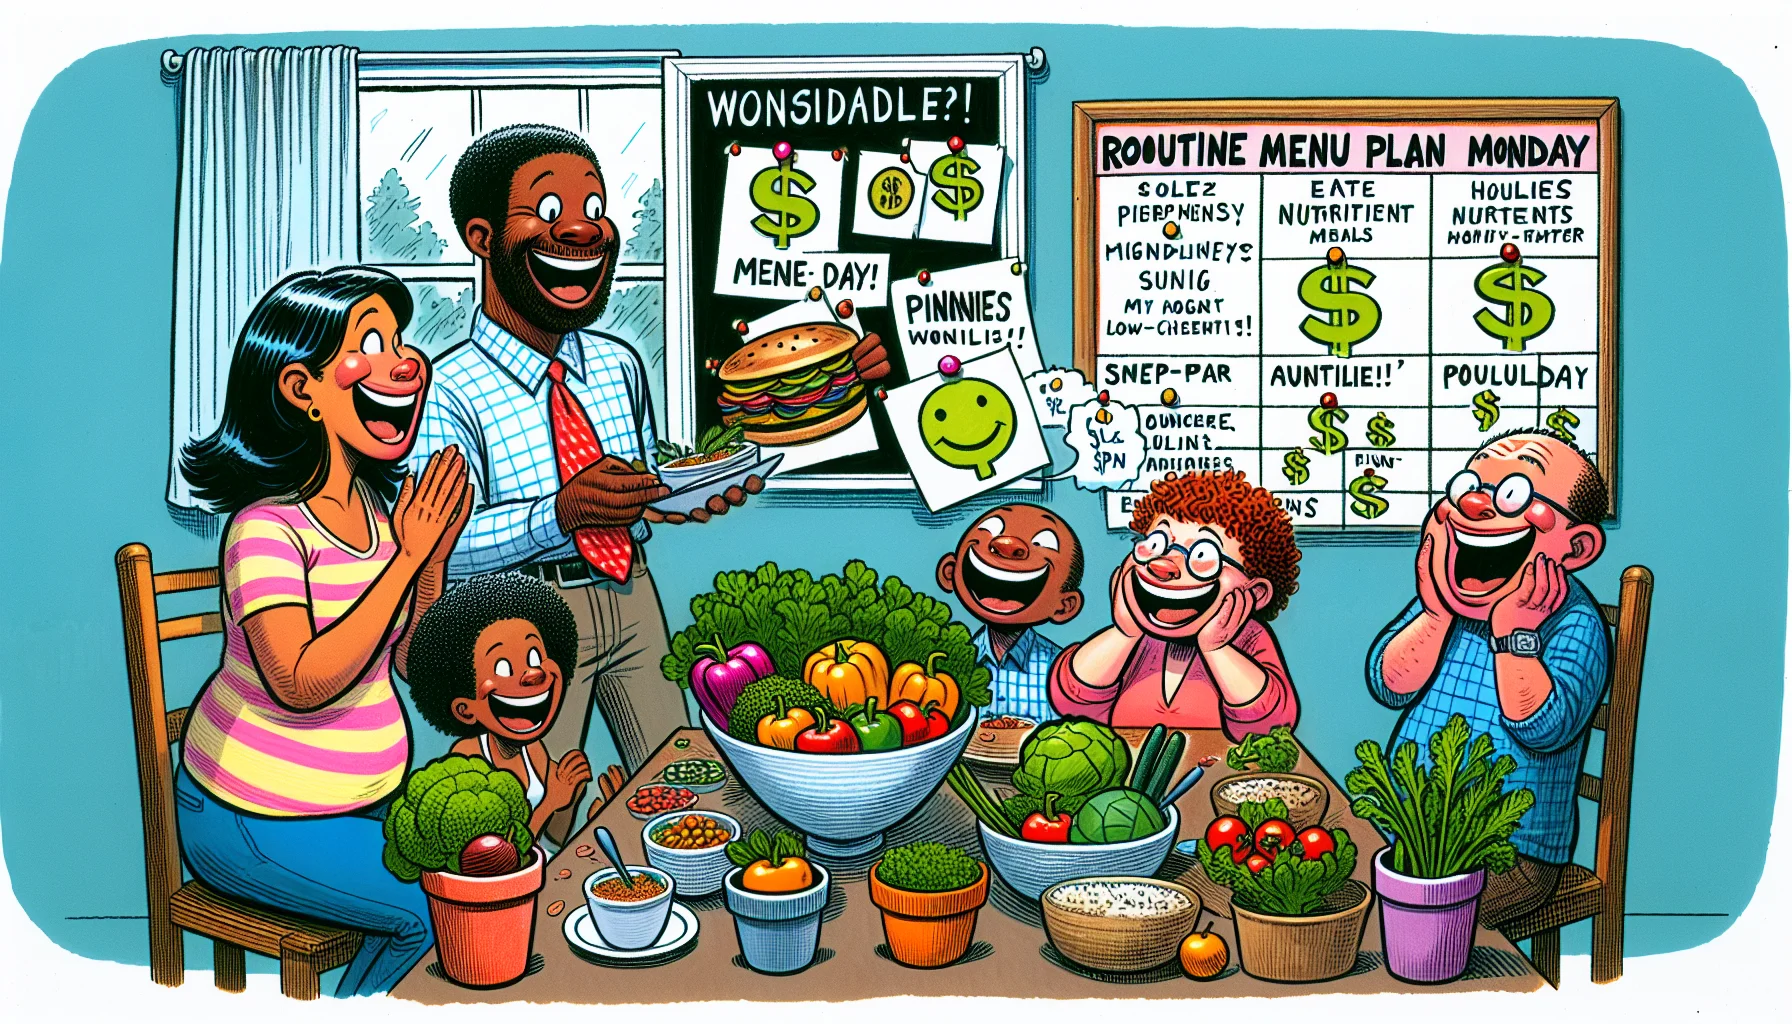 Illustrate a hilarious scenario involving 'Routine Menu Plan Monday.' The image should depict multiracial characters jovially discussing a strategic menu board containing a variety of low-cost but nutritious meals. To enforce the theme of affordability, the board could have catchy taglines like 'Eat Healthy for Pennies!' with dollar signs turned into smiley faces. The room should signify a homey atmosphere, adorned with pots of vibrant vegetables and fruits, symbolizing freshness. Characters should encompass a range of ages, and their excited expressions will indicate their eagerness to stick to the new menu plan.